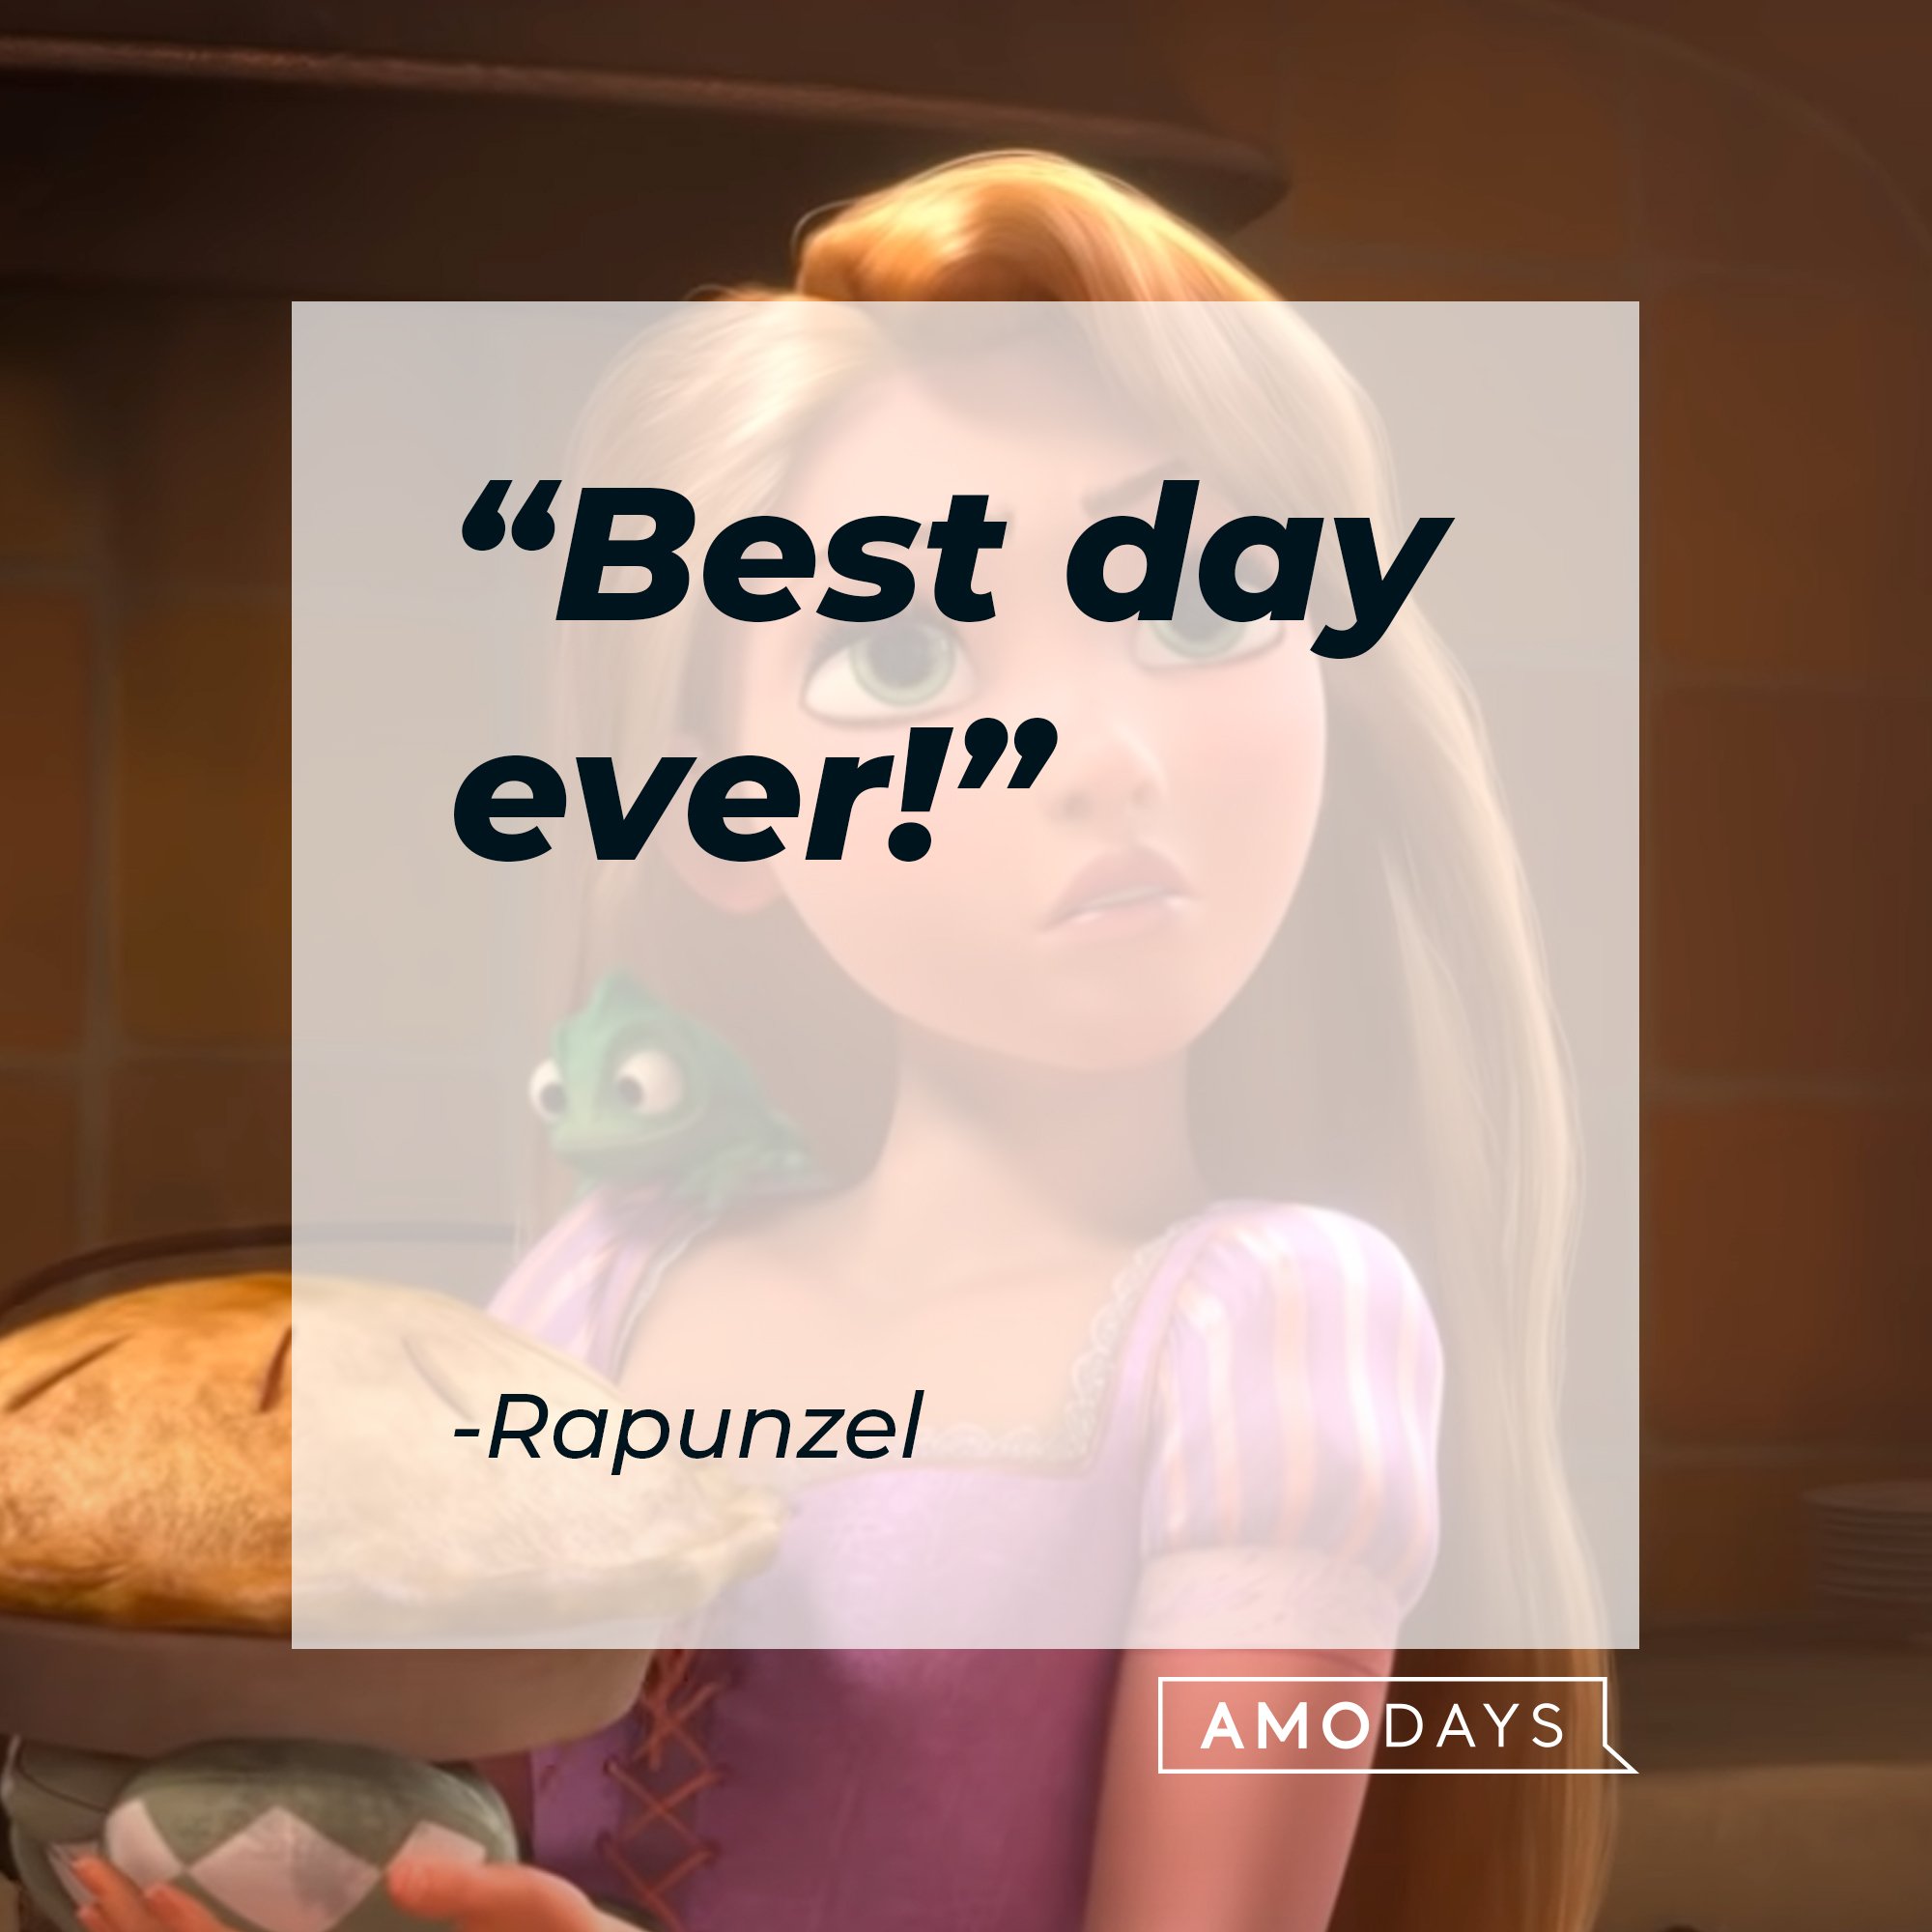 Rapunzel's quote: "Best Day Ever!" | Image: AmoDays